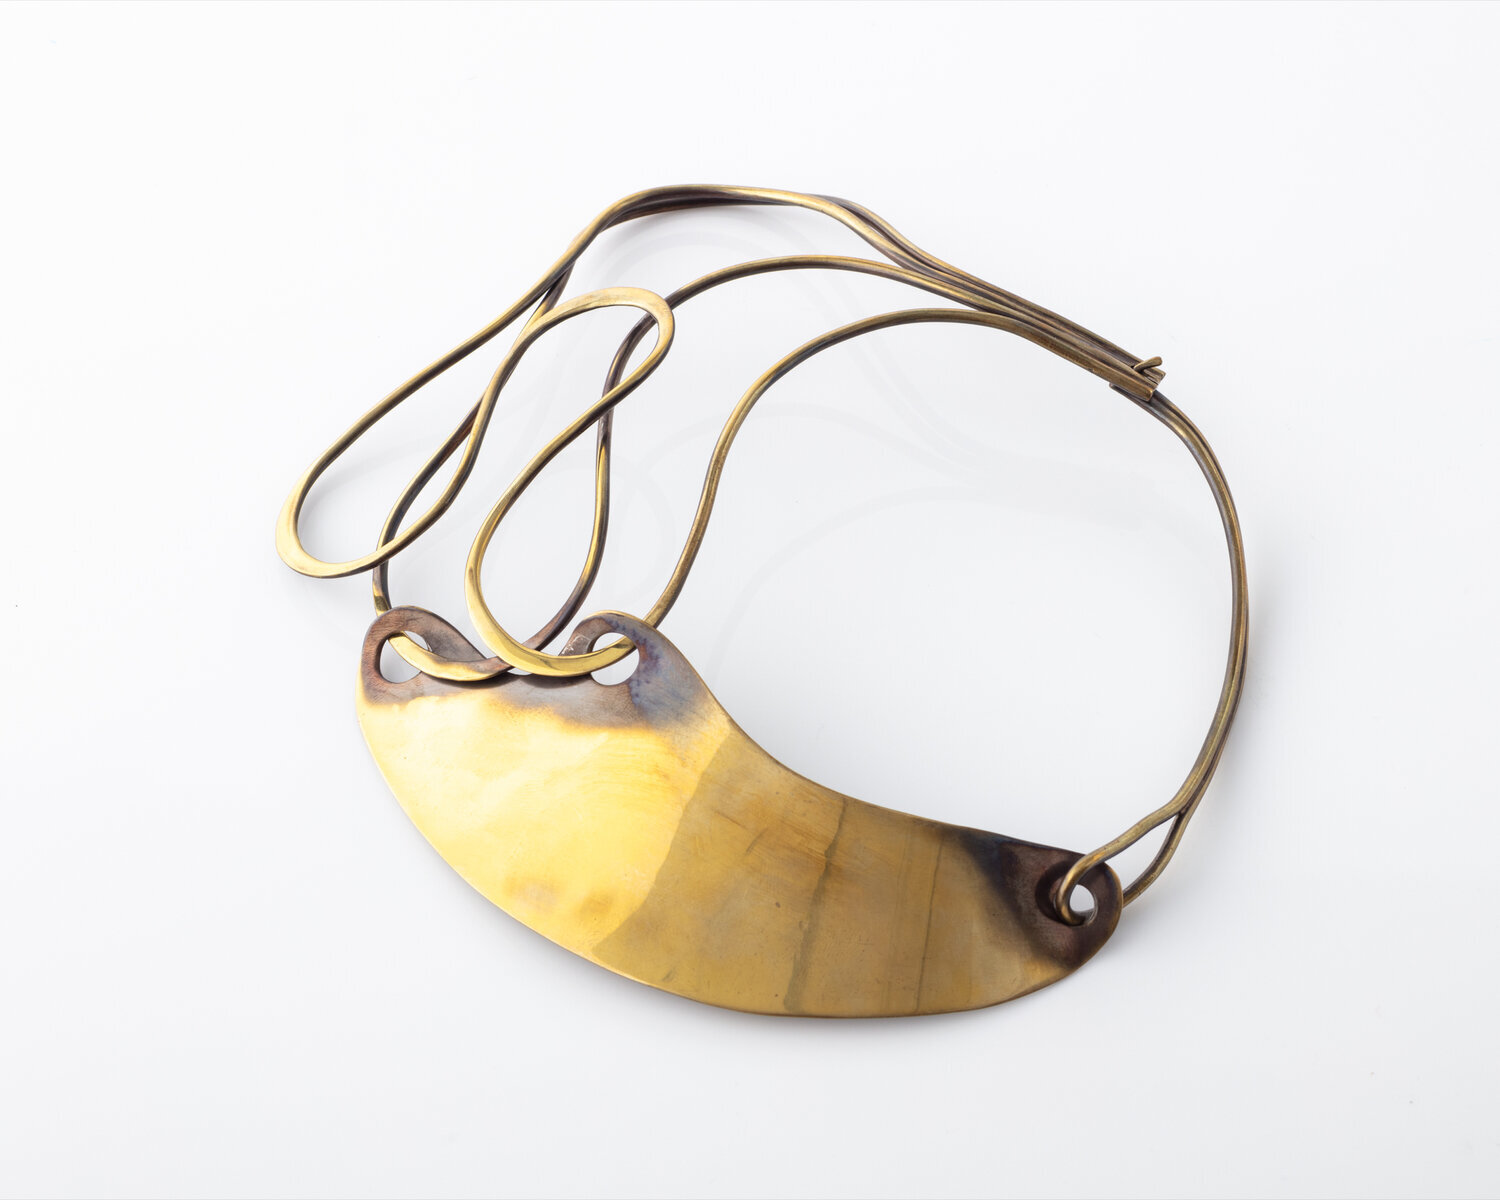   Half and half  necklace in brass. Designed and made by Art Smith, USA, 1946-82. Photograph by Joe Kramm. 